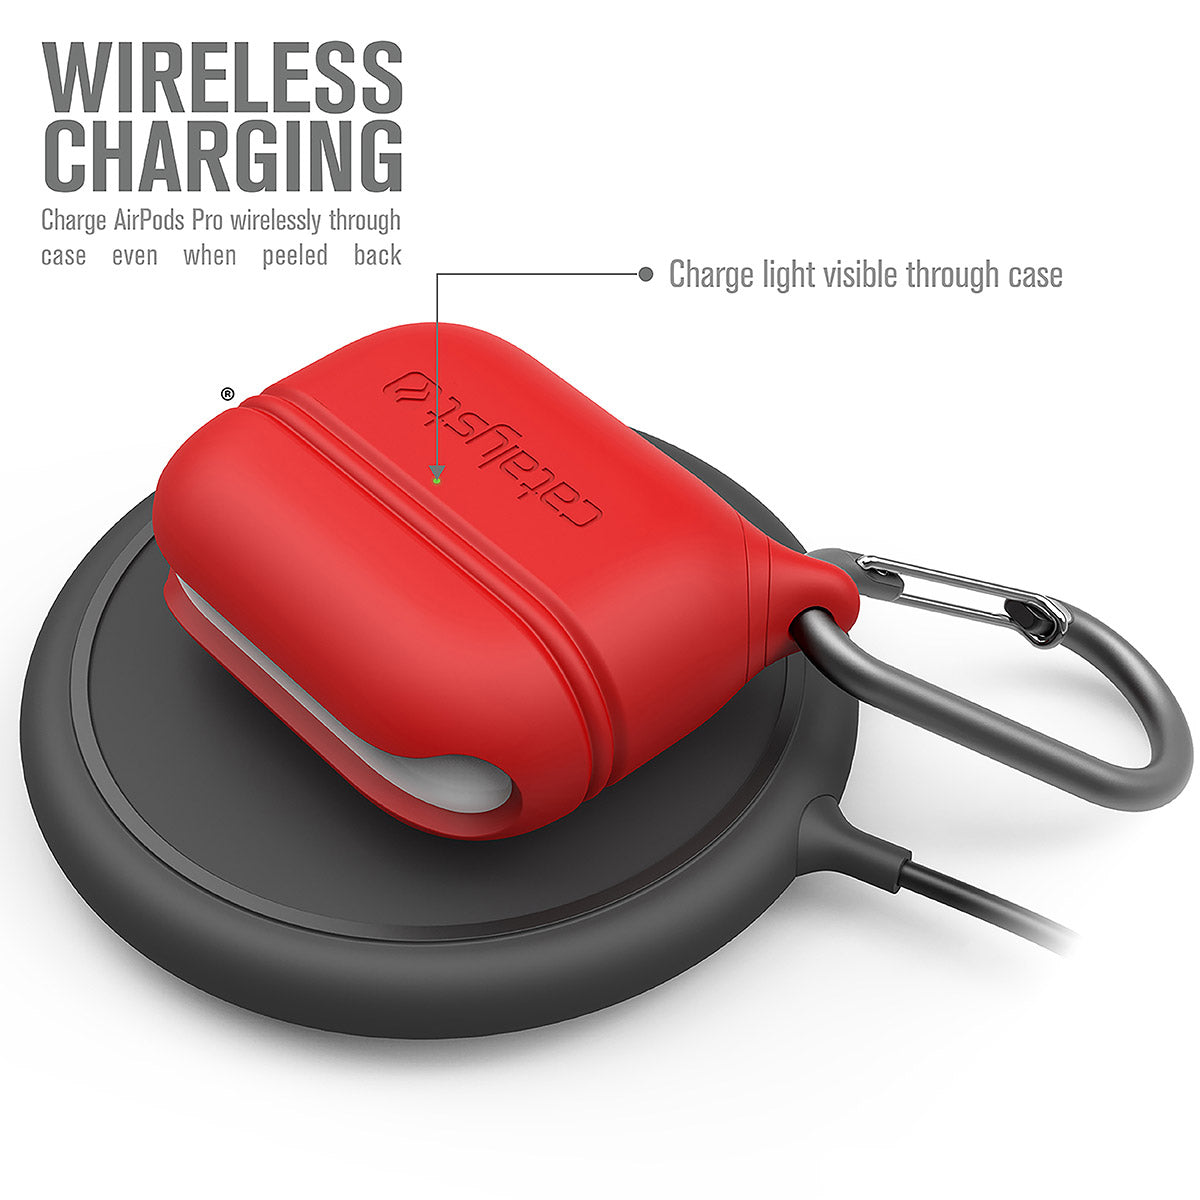 catalyst airpods pro gen 2 1 waterproof case carabiner special edition red on top of a wireless charger text reads wireless charging charge airpods pro wirelessly through case even when peeled back charge light visible through case